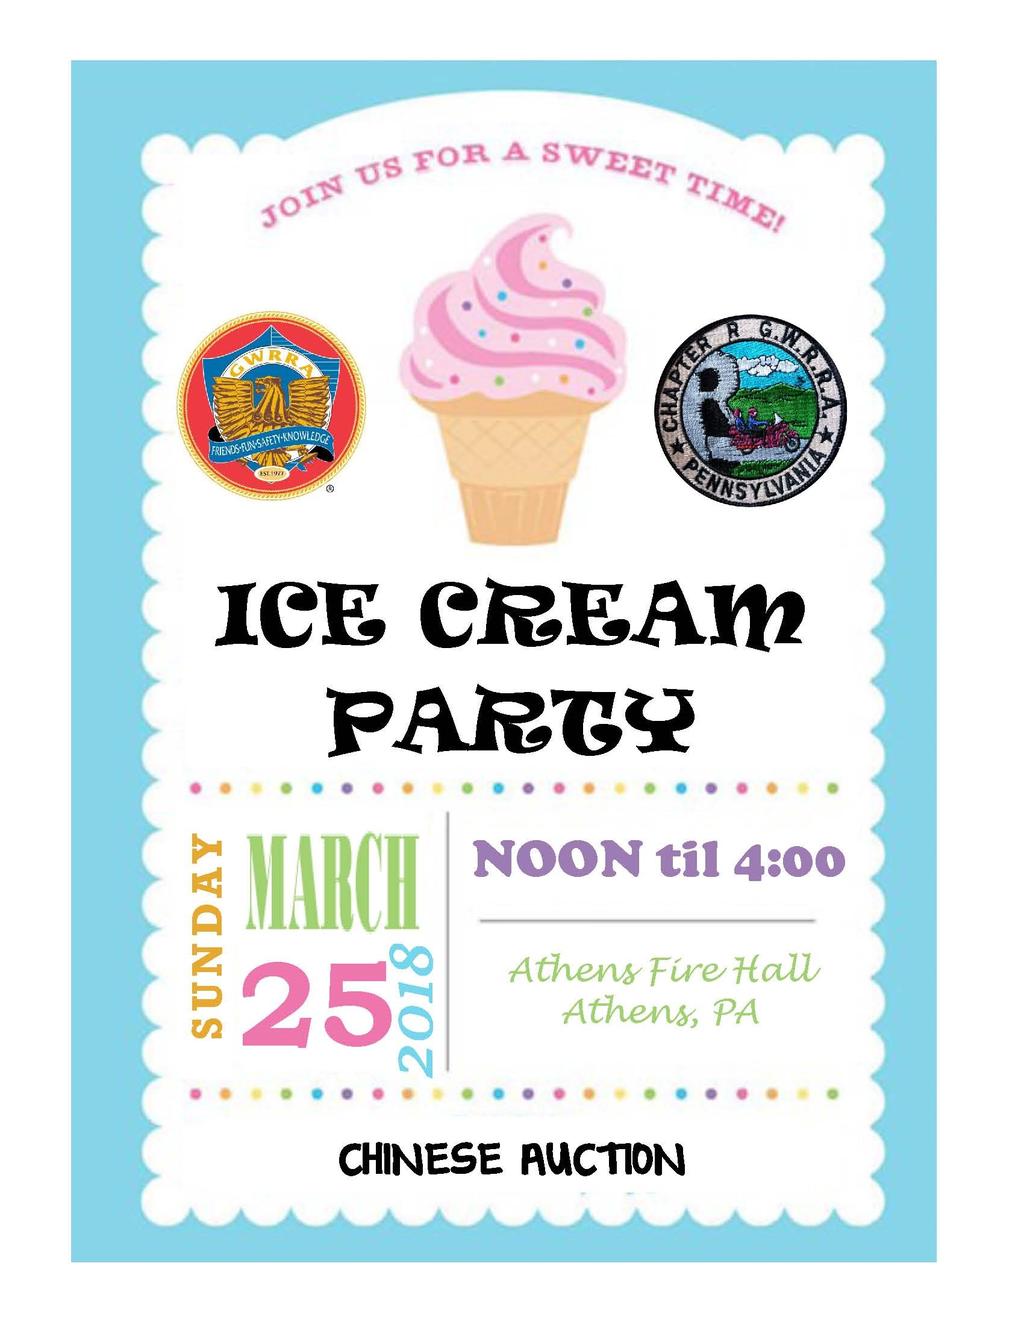 Get Out Your Ice Cream Makers! Chapter "R" is planning a home made ice cream party for March 25,2018 at the Athens Fire Hall. Also planning to have a Chinese Auction to have a little FUN!